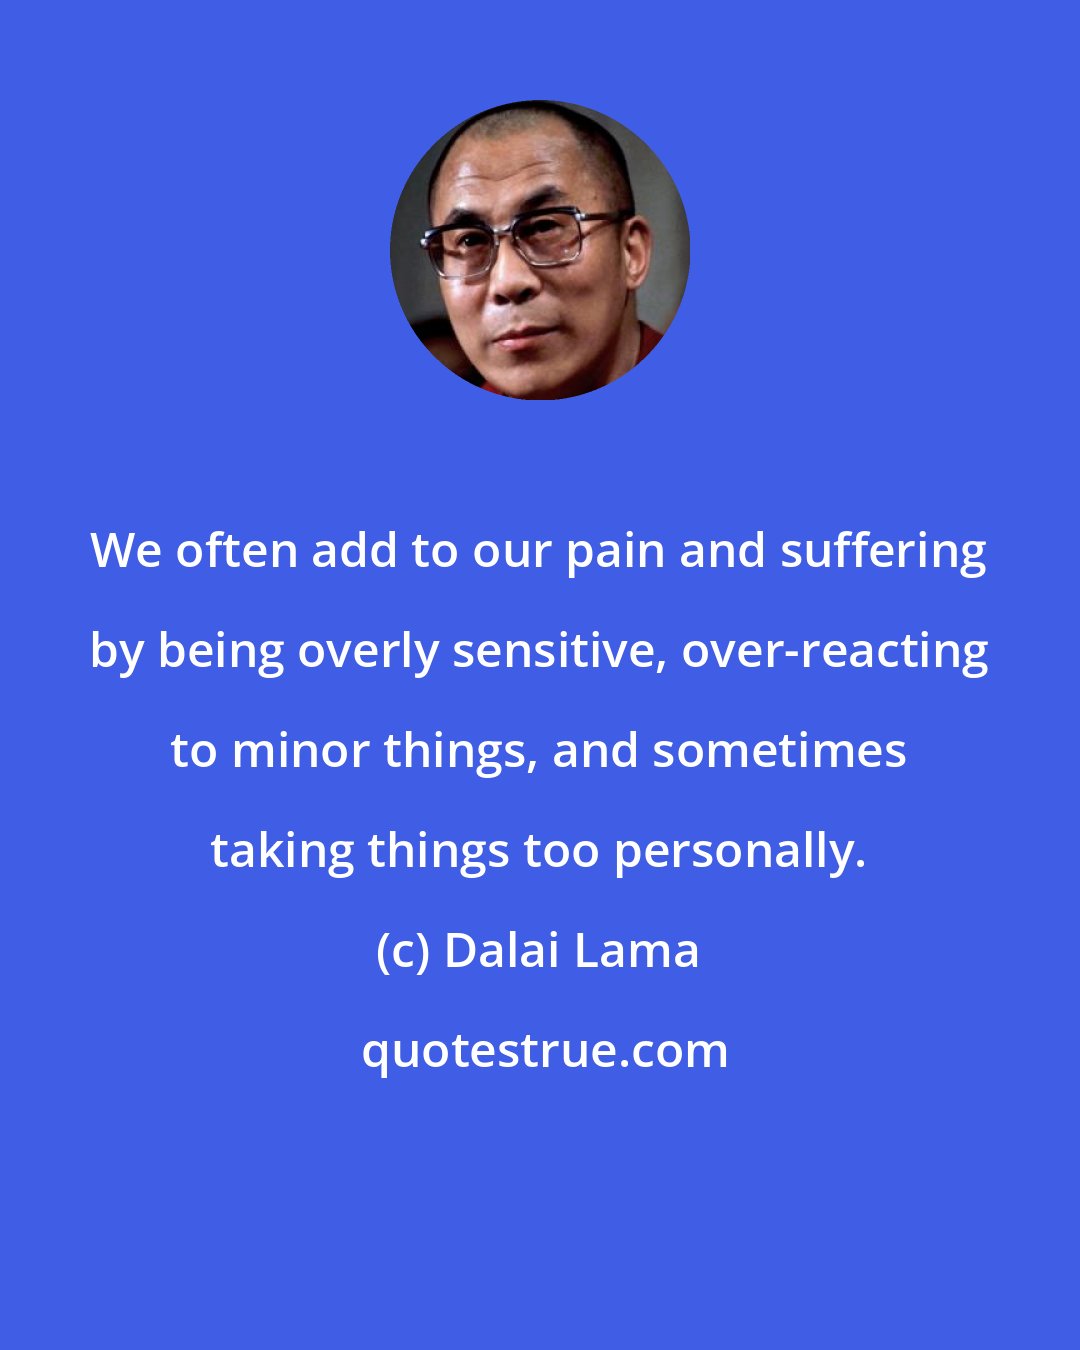 Dalai Lama: We often add to our pain and suffering by being overly sensitive, over-reacting to minor things, and sometimes taking things too personally.